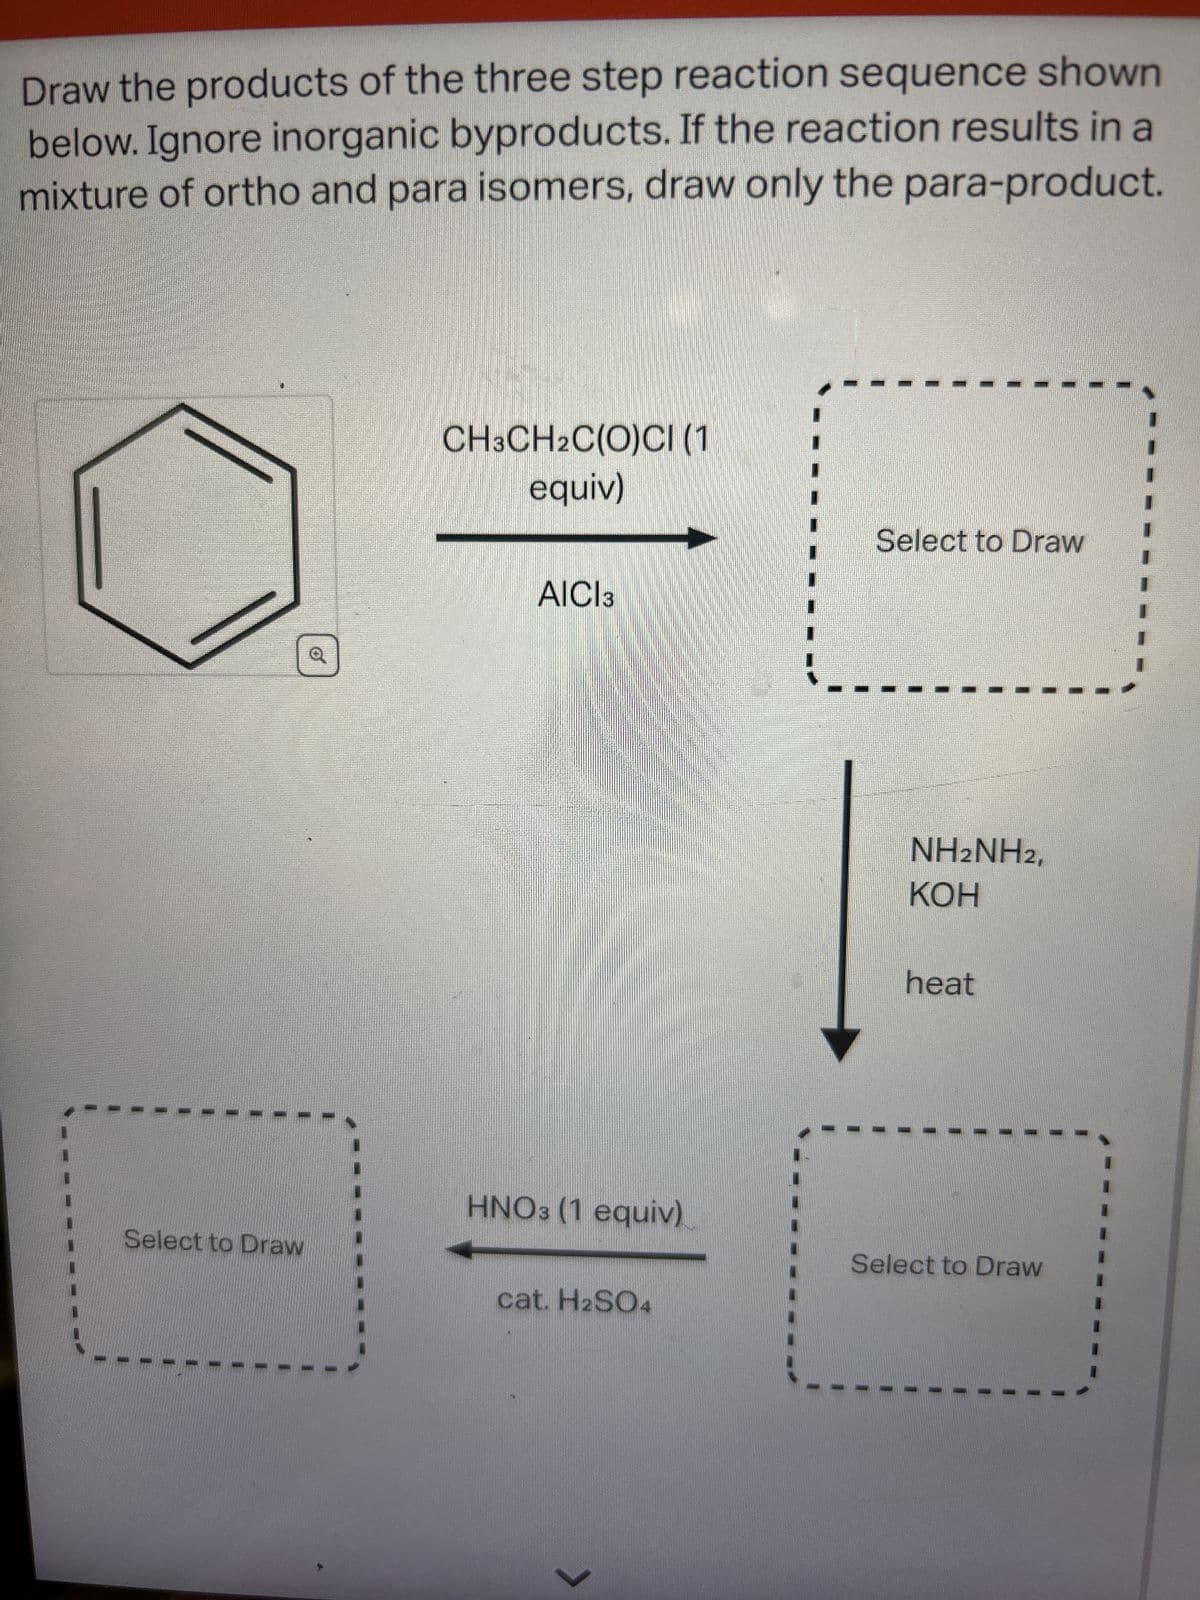 Draw the products of the three step reaction sequence shown
below. Ignore inorganic byproducts. If the reaction results in a
mixture of ortho and para isomers, draw only the para-product.
Select to Draw
CH3CH2C(O)CI (1
equiv)
AICI 3
HNO3 (1 equiv)
cat. H2SO4
>
Select to Draw
NH2NH2,
KOH
heat
Select to Draw